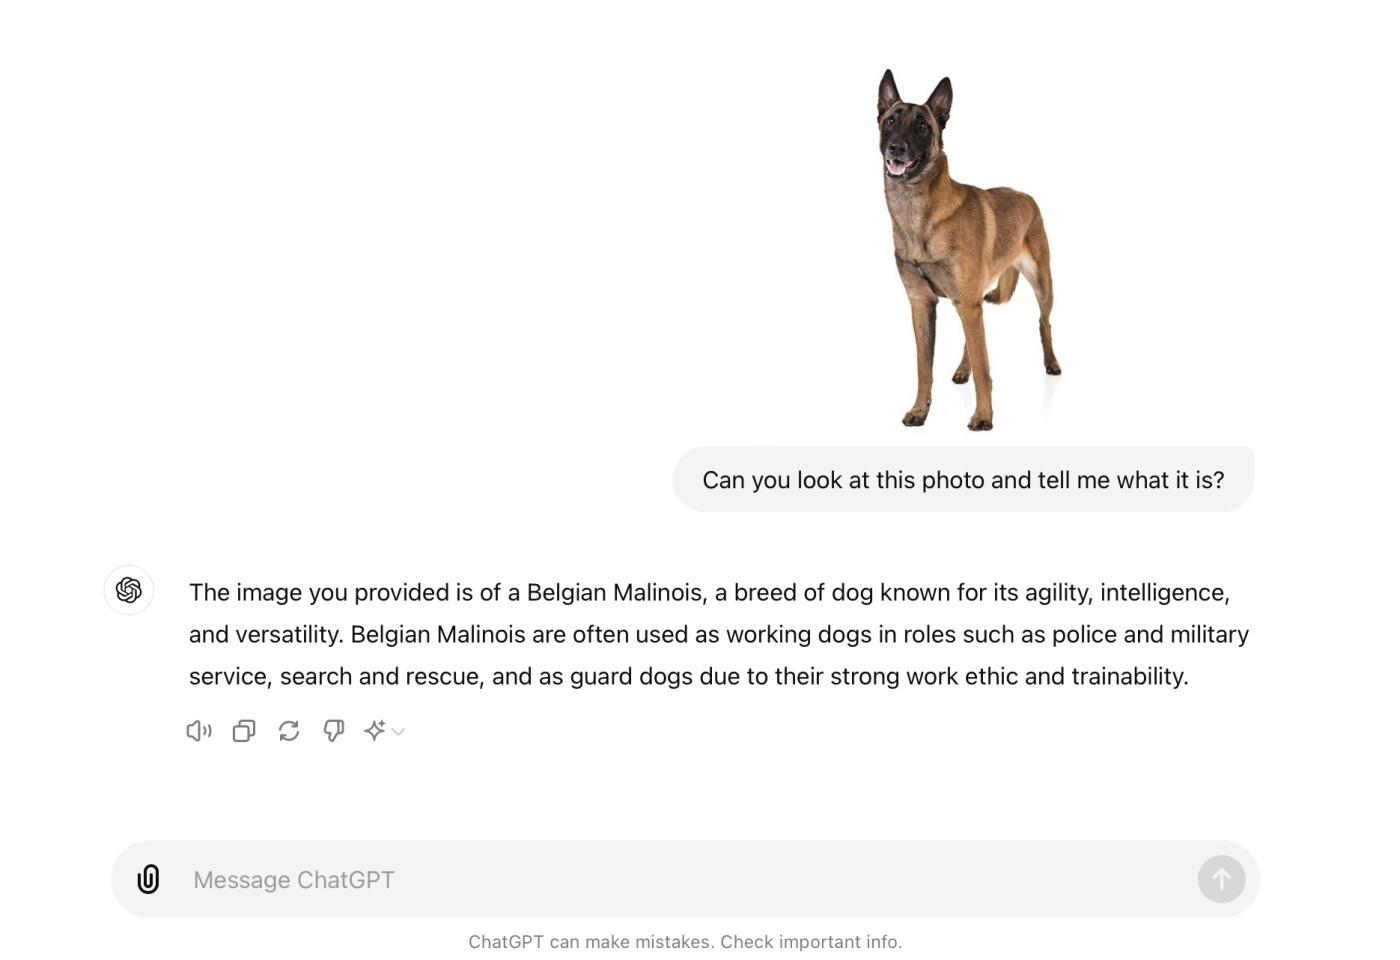 ChatGPT identifying an image